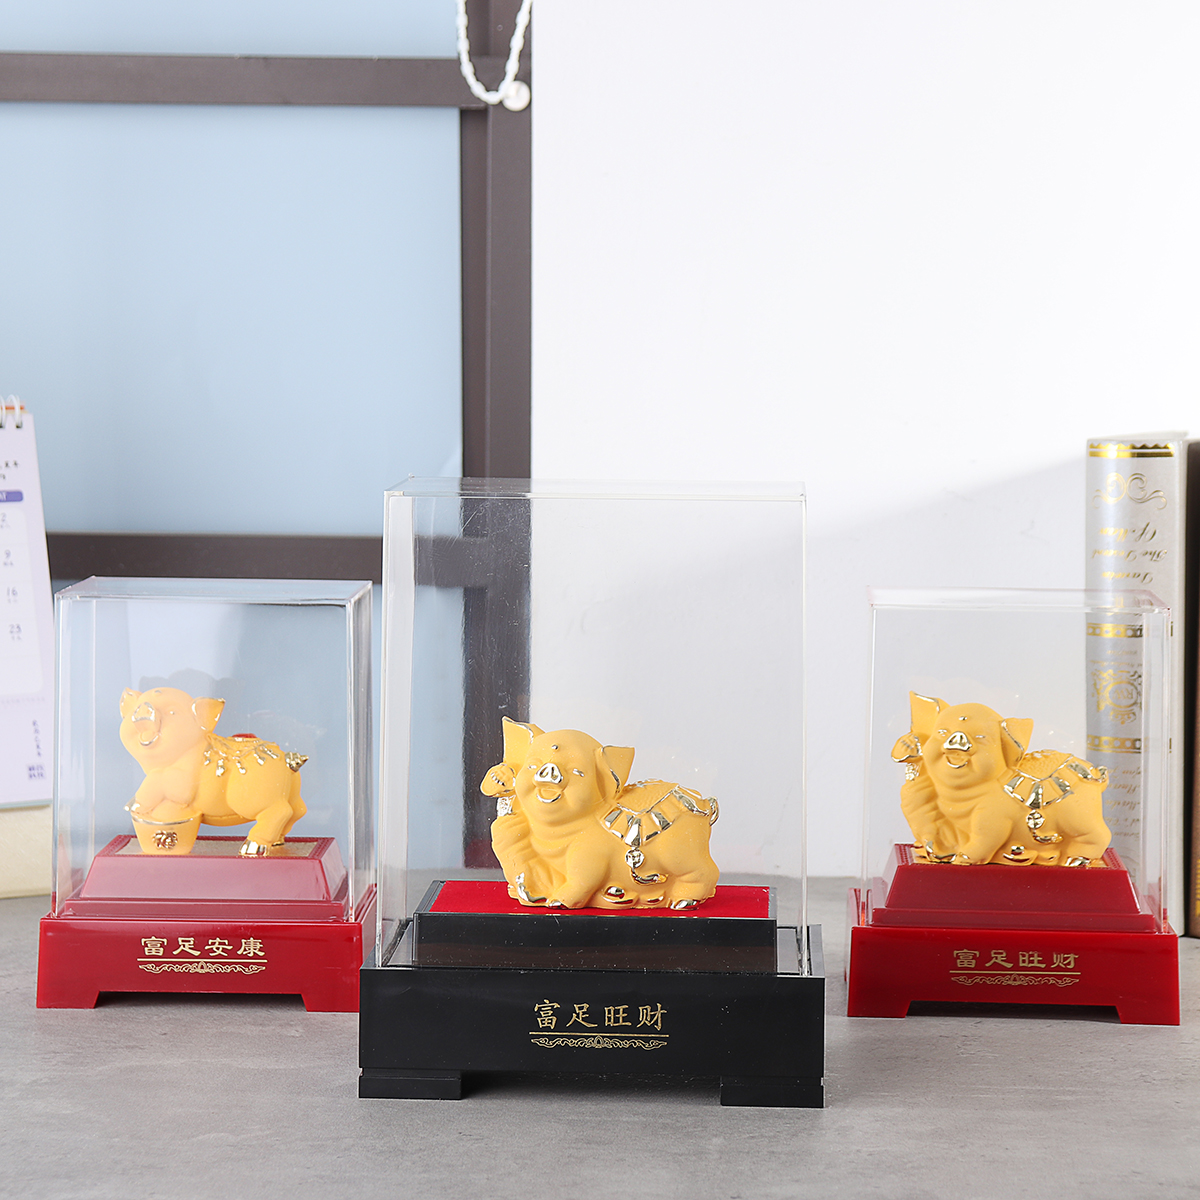 2019-Chinese-Zodiac-Gold-Pig-Money-Wealth-Statue-Office-Home-Decorations-Ornament-Gift-1515810-1